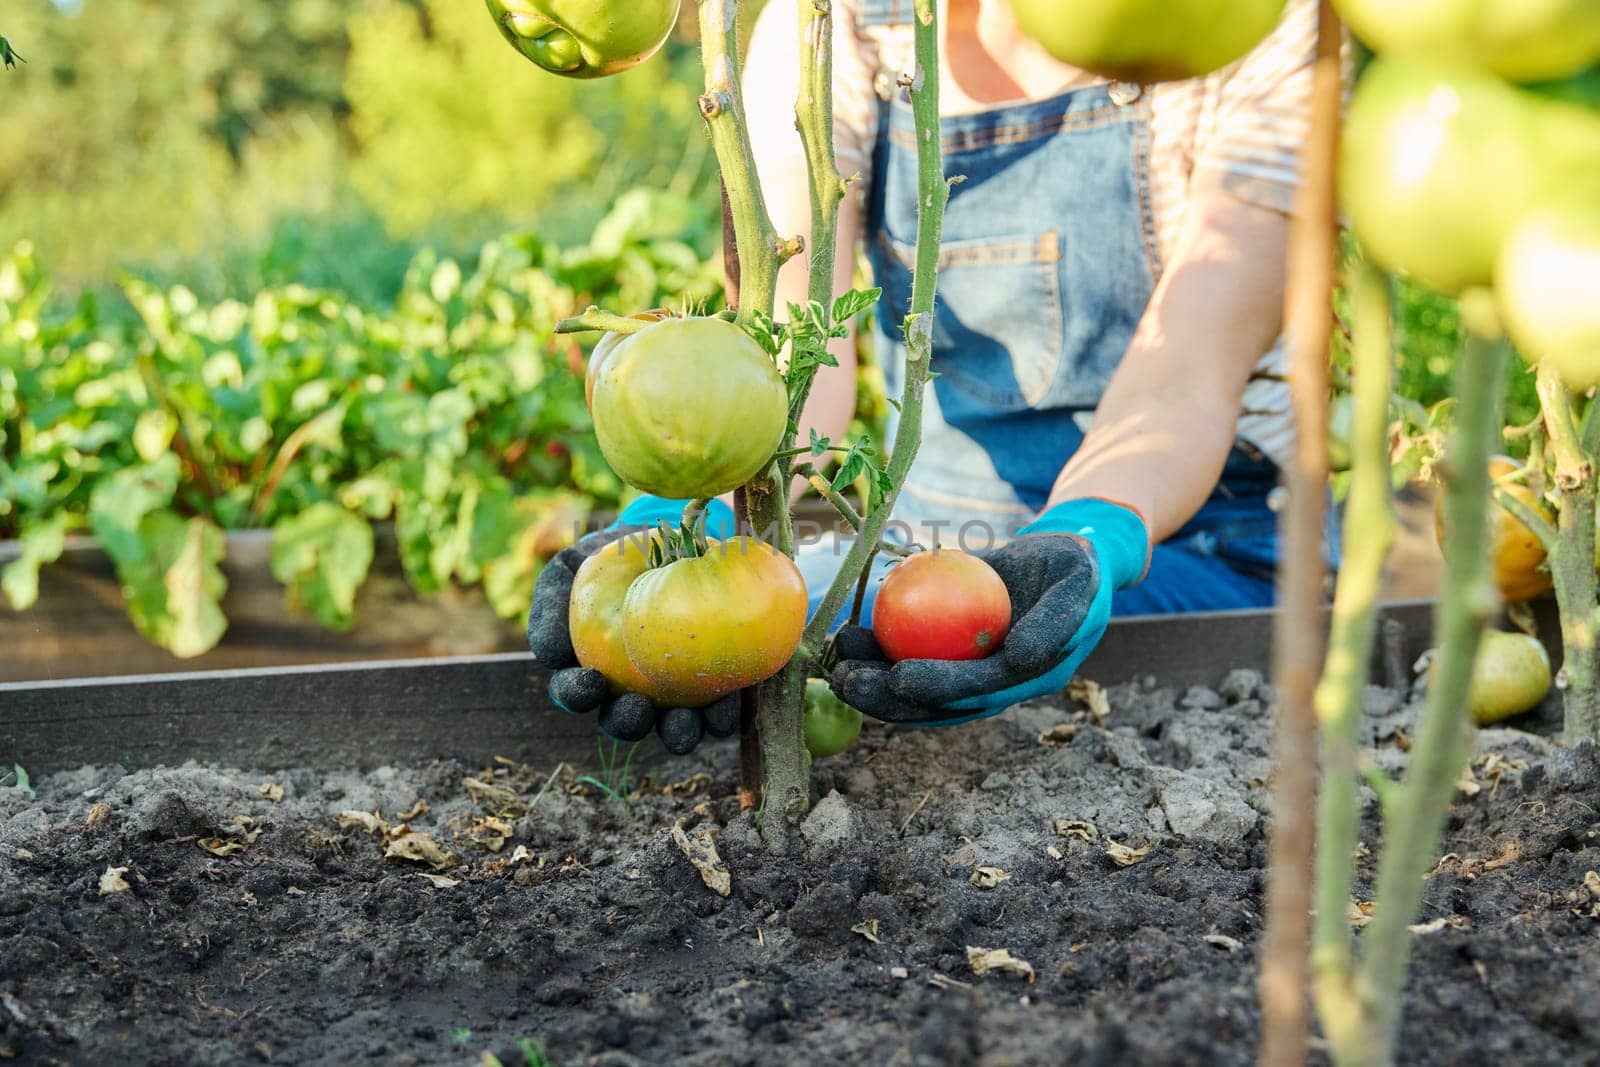 Green ripening tomatoes on bushes in garden bed, hands of woman farmer with tomatoes. by VH-studio